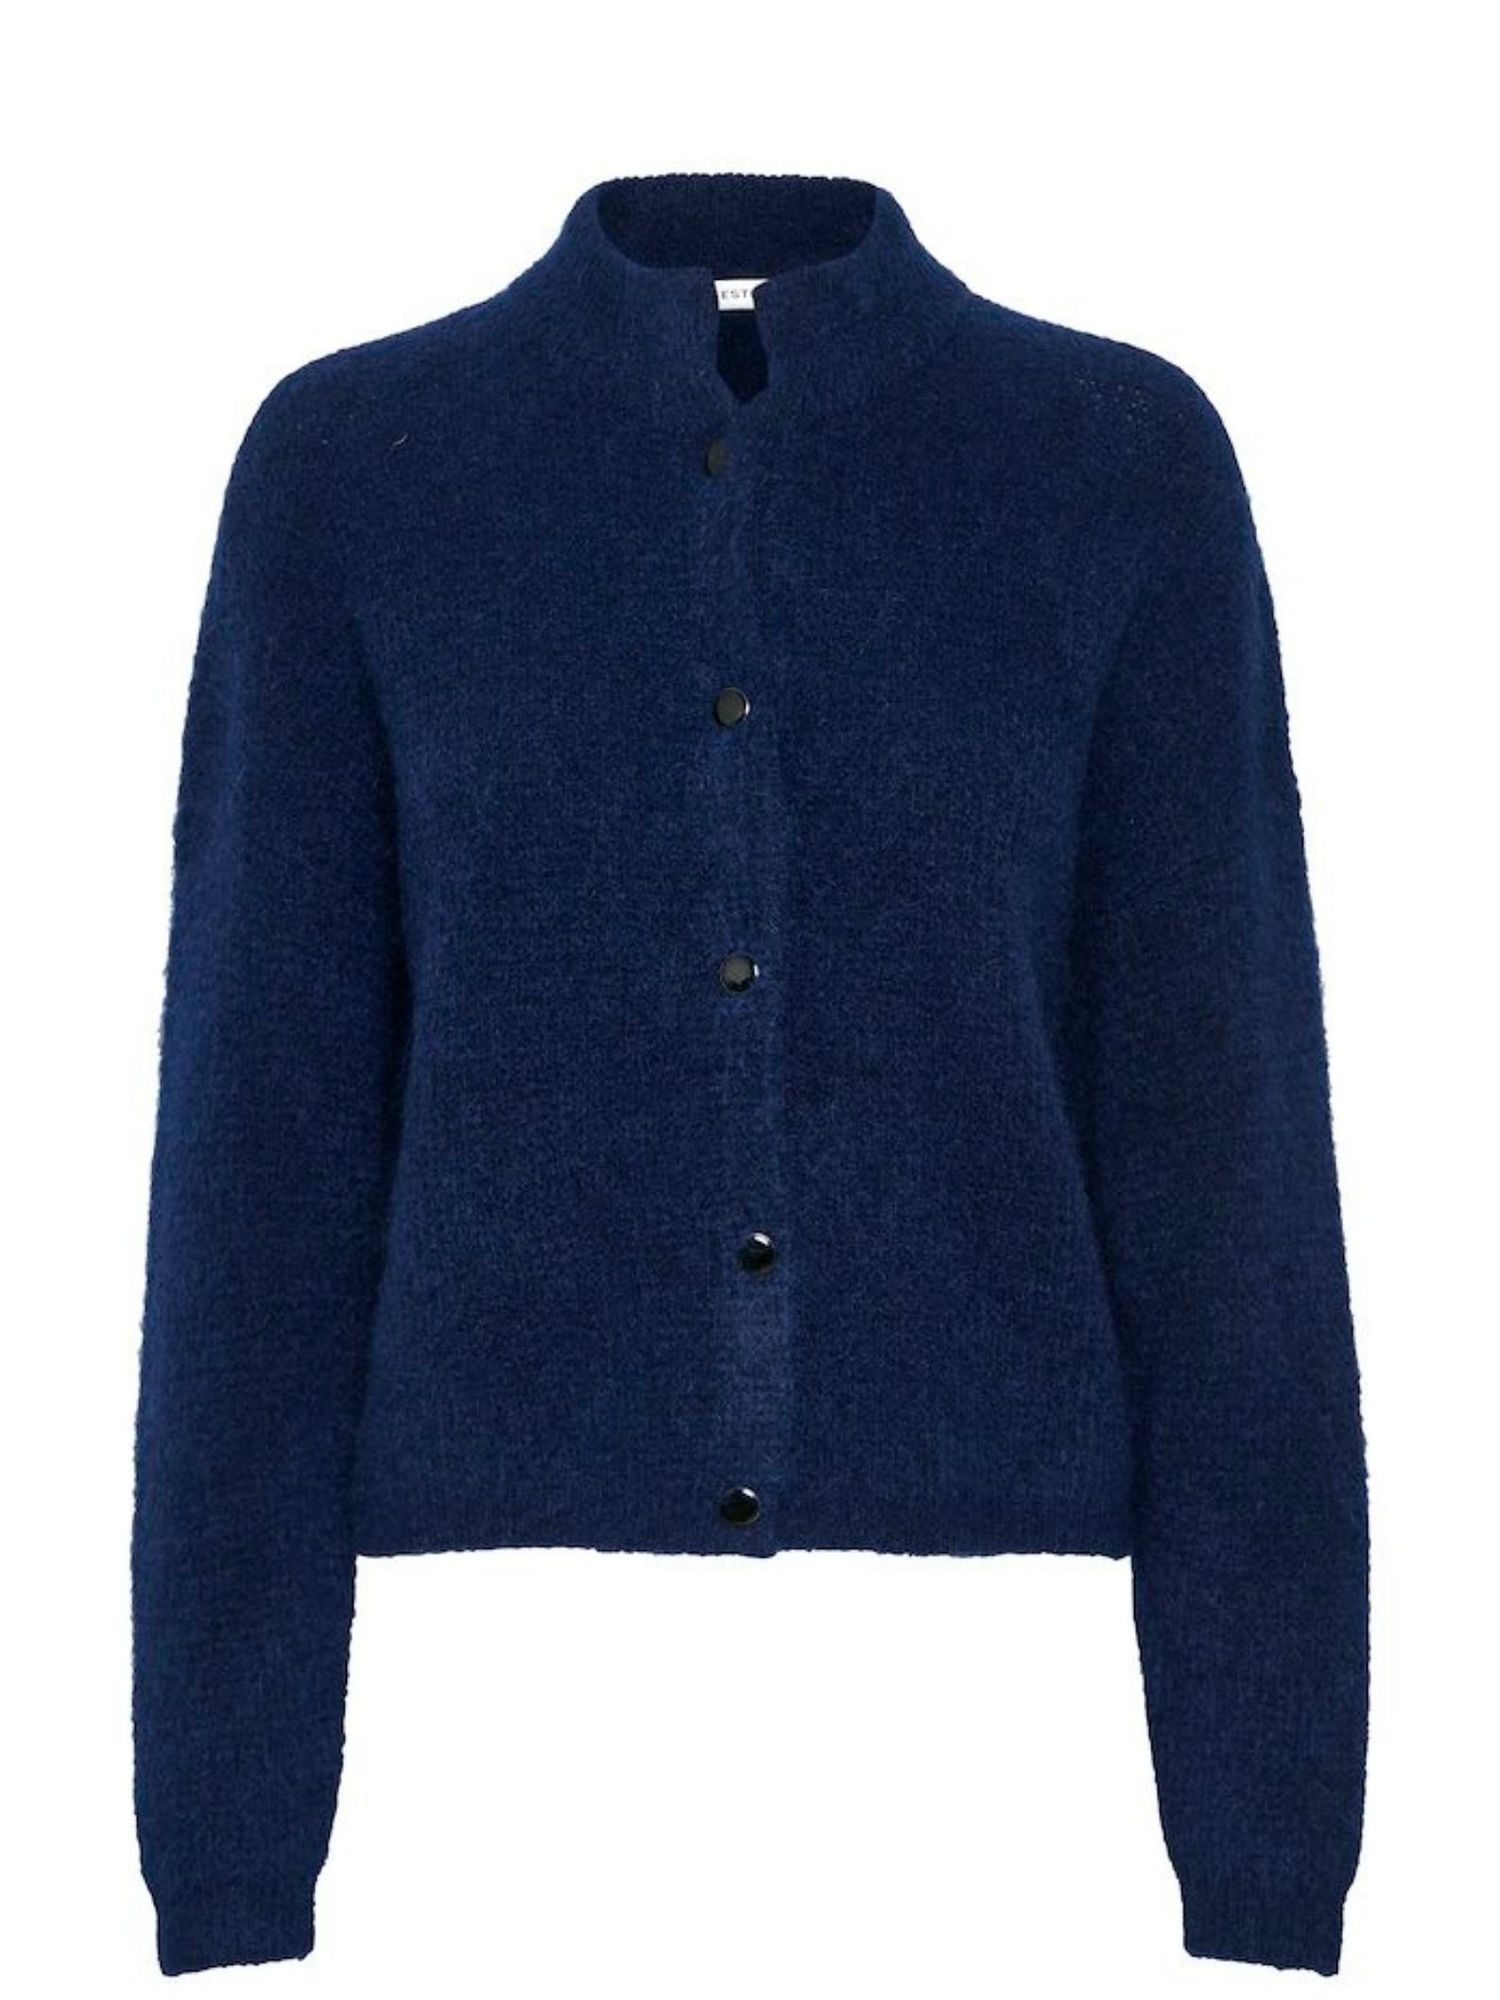 Stay warm with these 6 classic knitted cardigans - Vogue Scandinavia